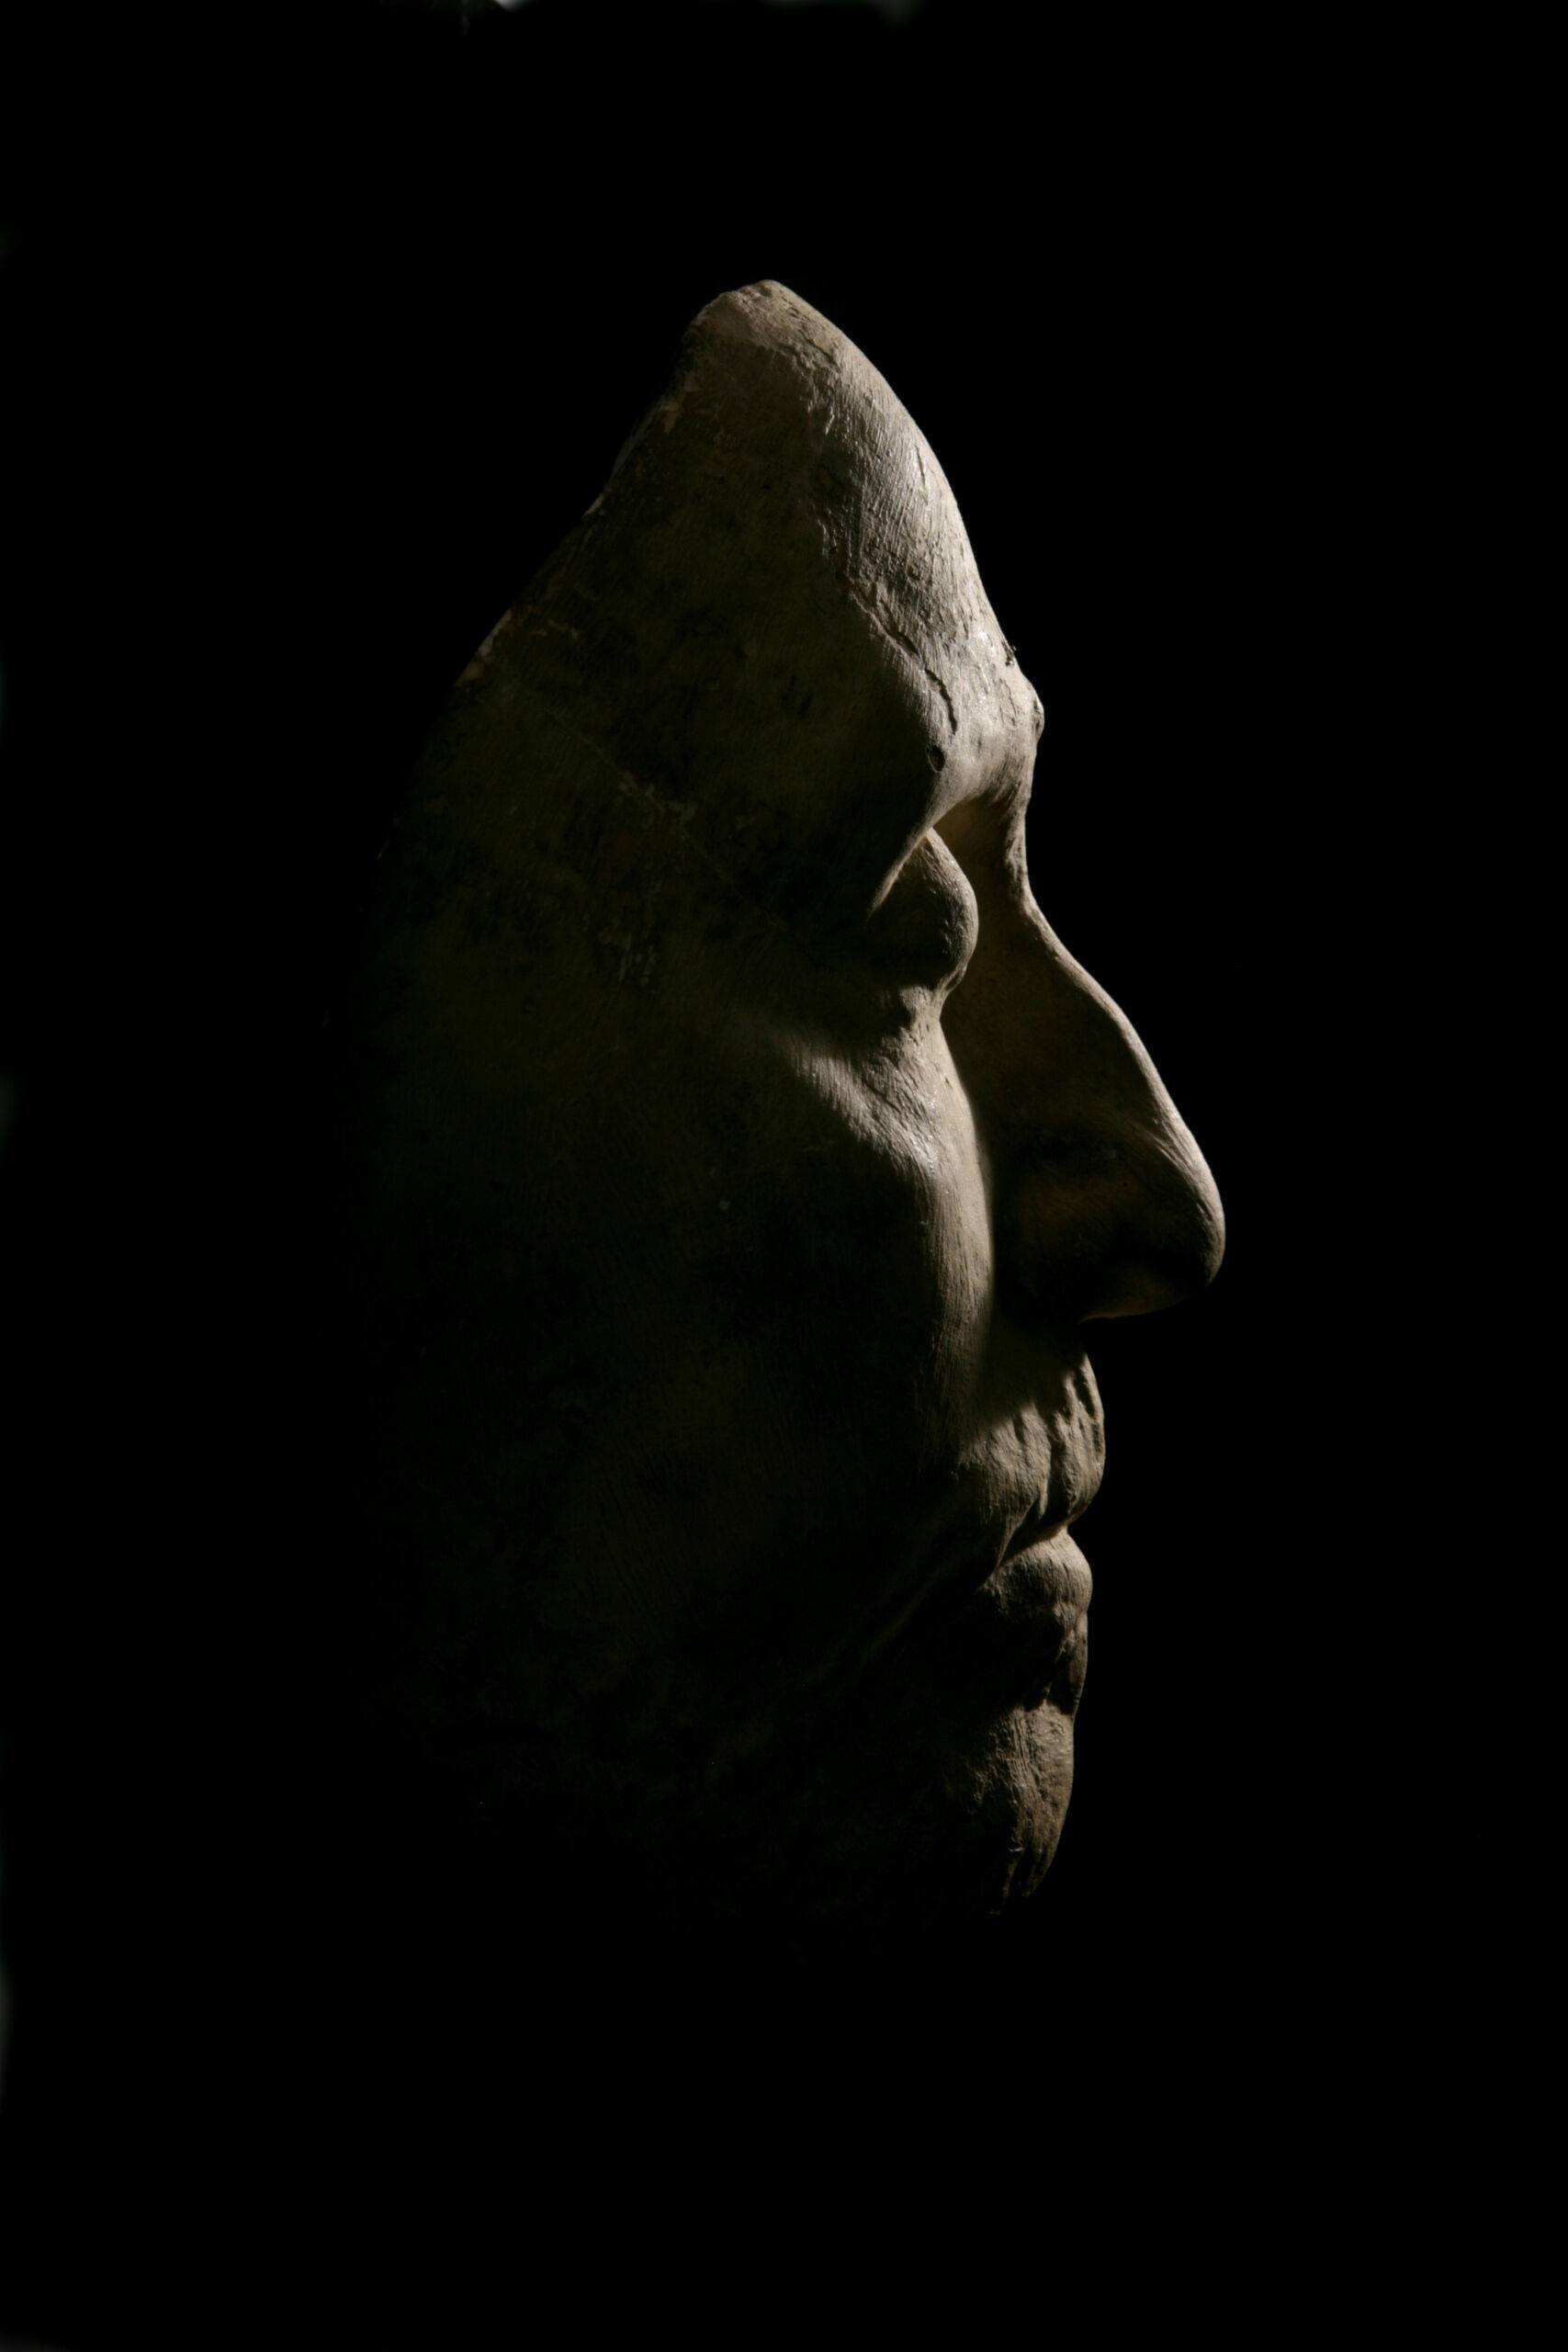 A photo of Oliver Cromwell's death mask, dramatically lit on a dark background.